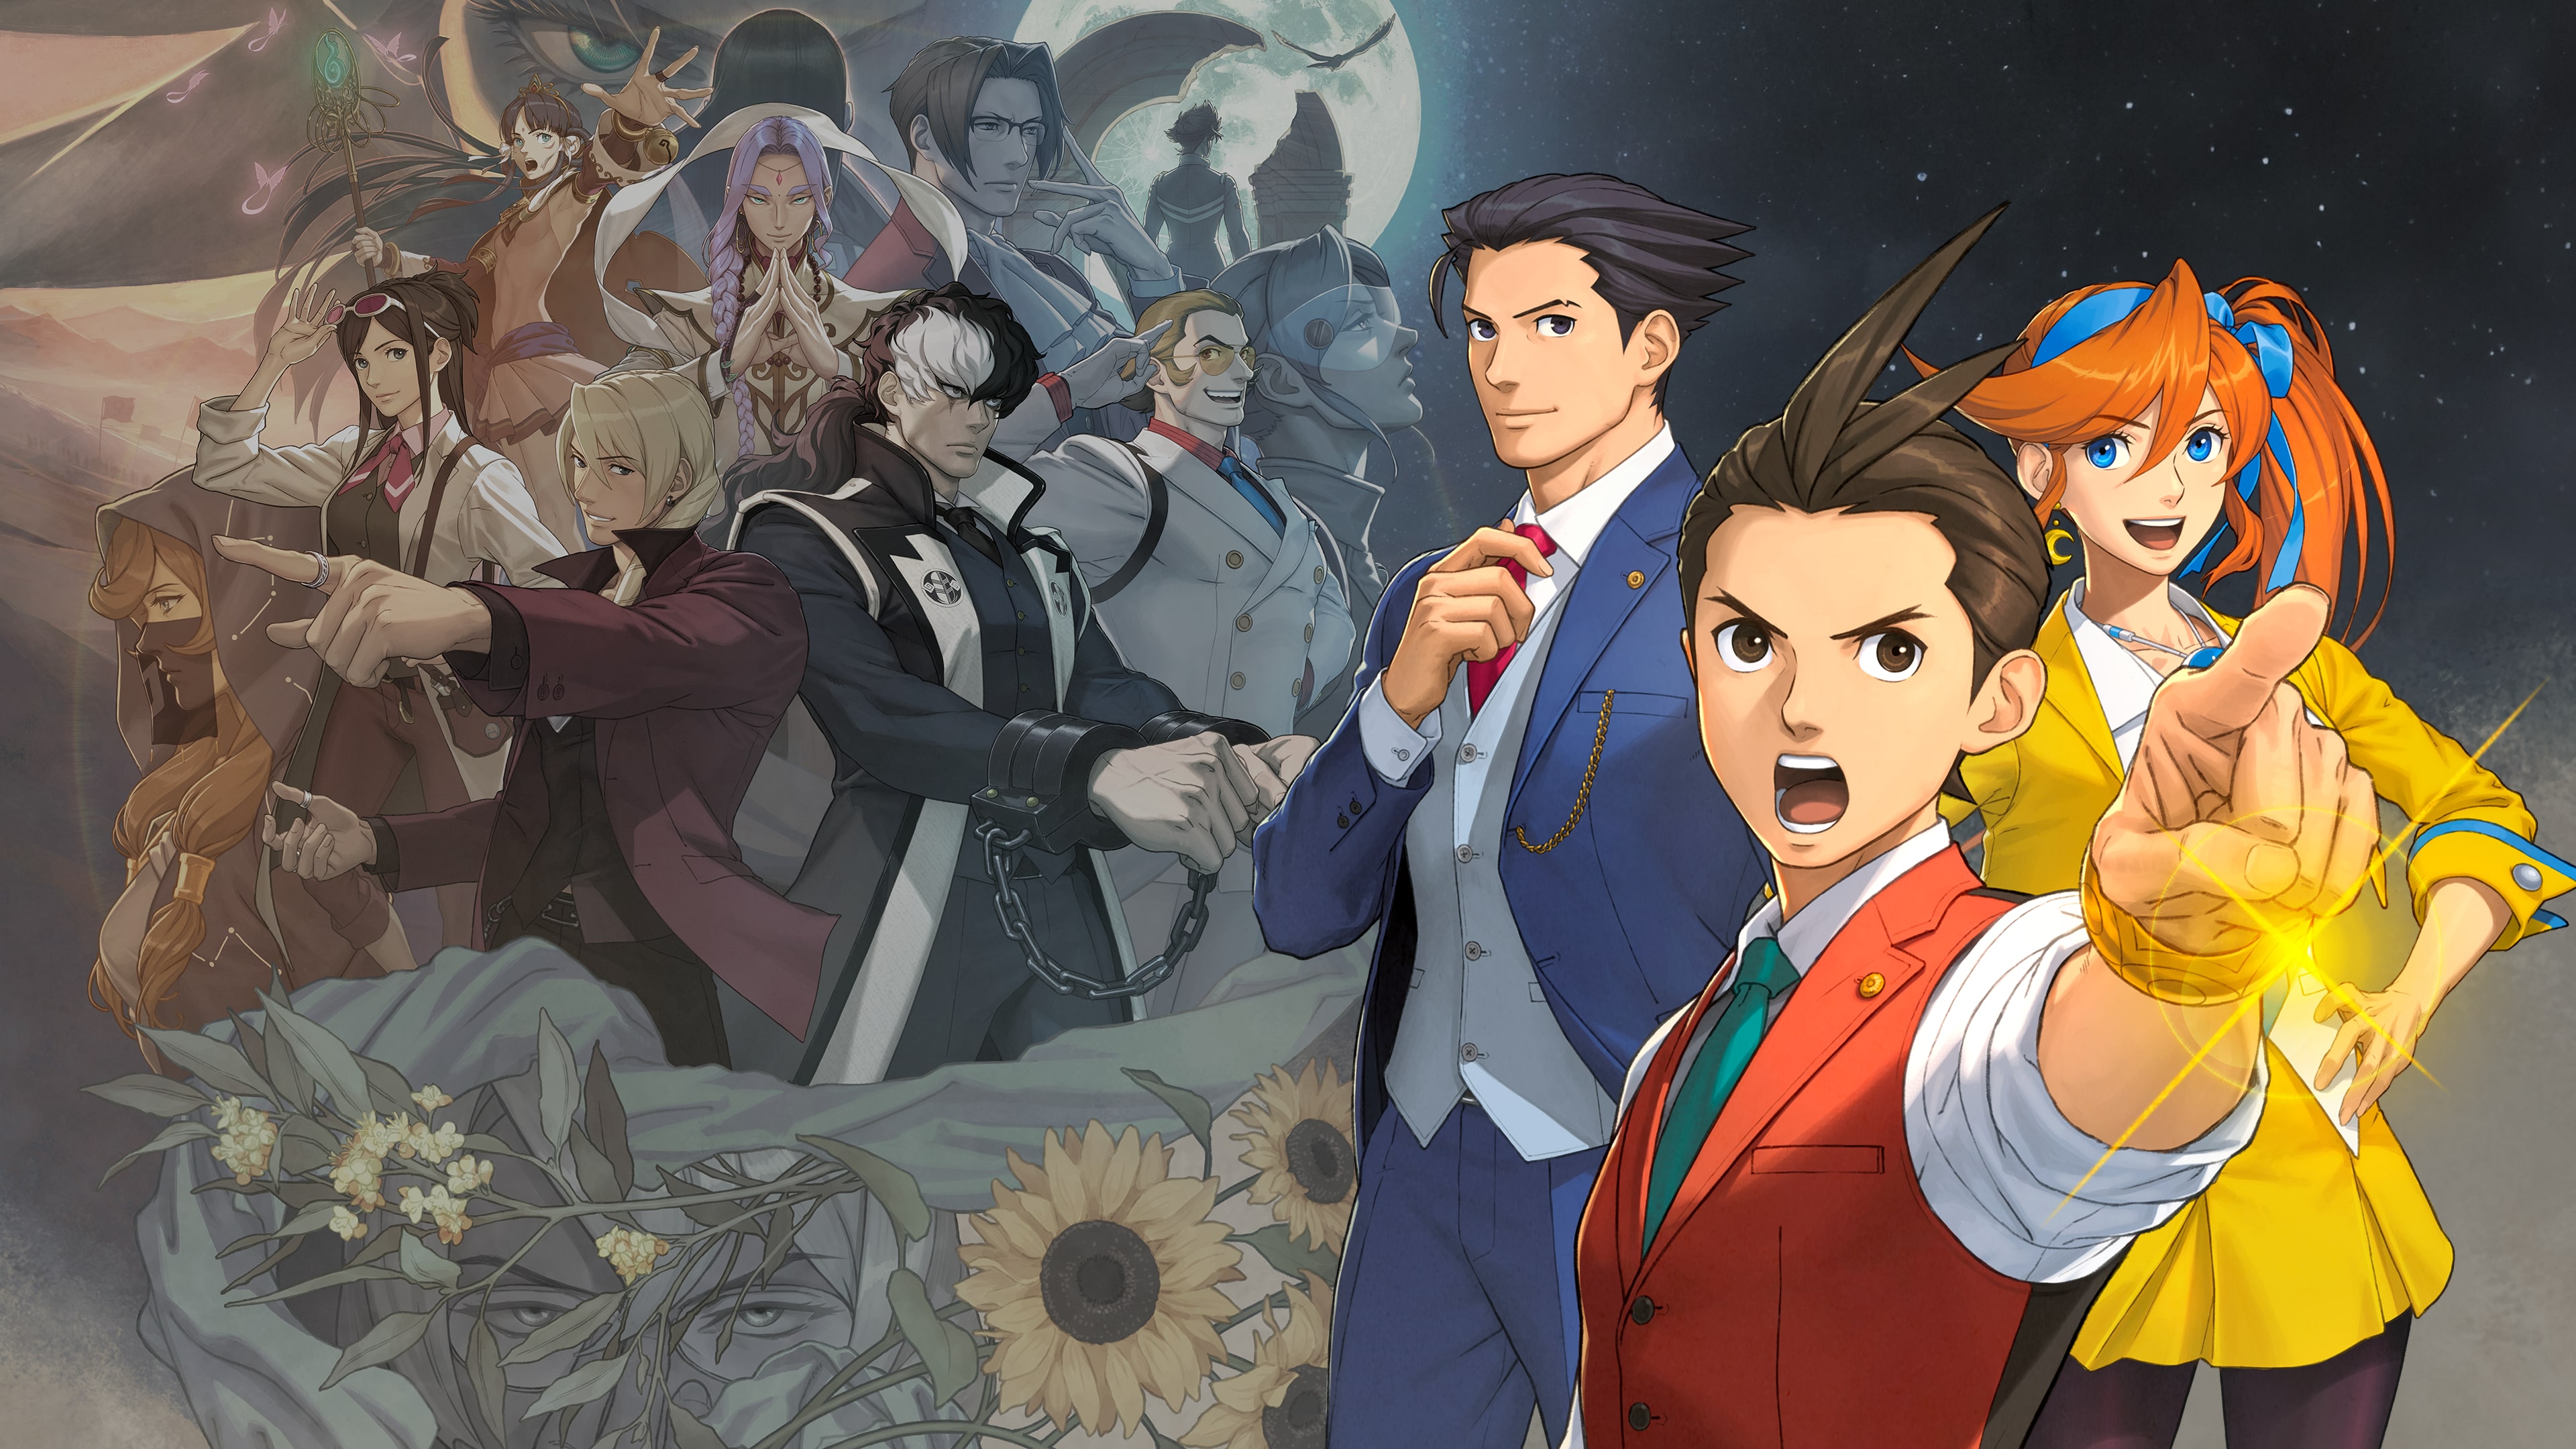 Apollo Justice: Ace Attorney Trilogy (Simplified Chinese, English, Korean, Japanese, Traditional Chinese)